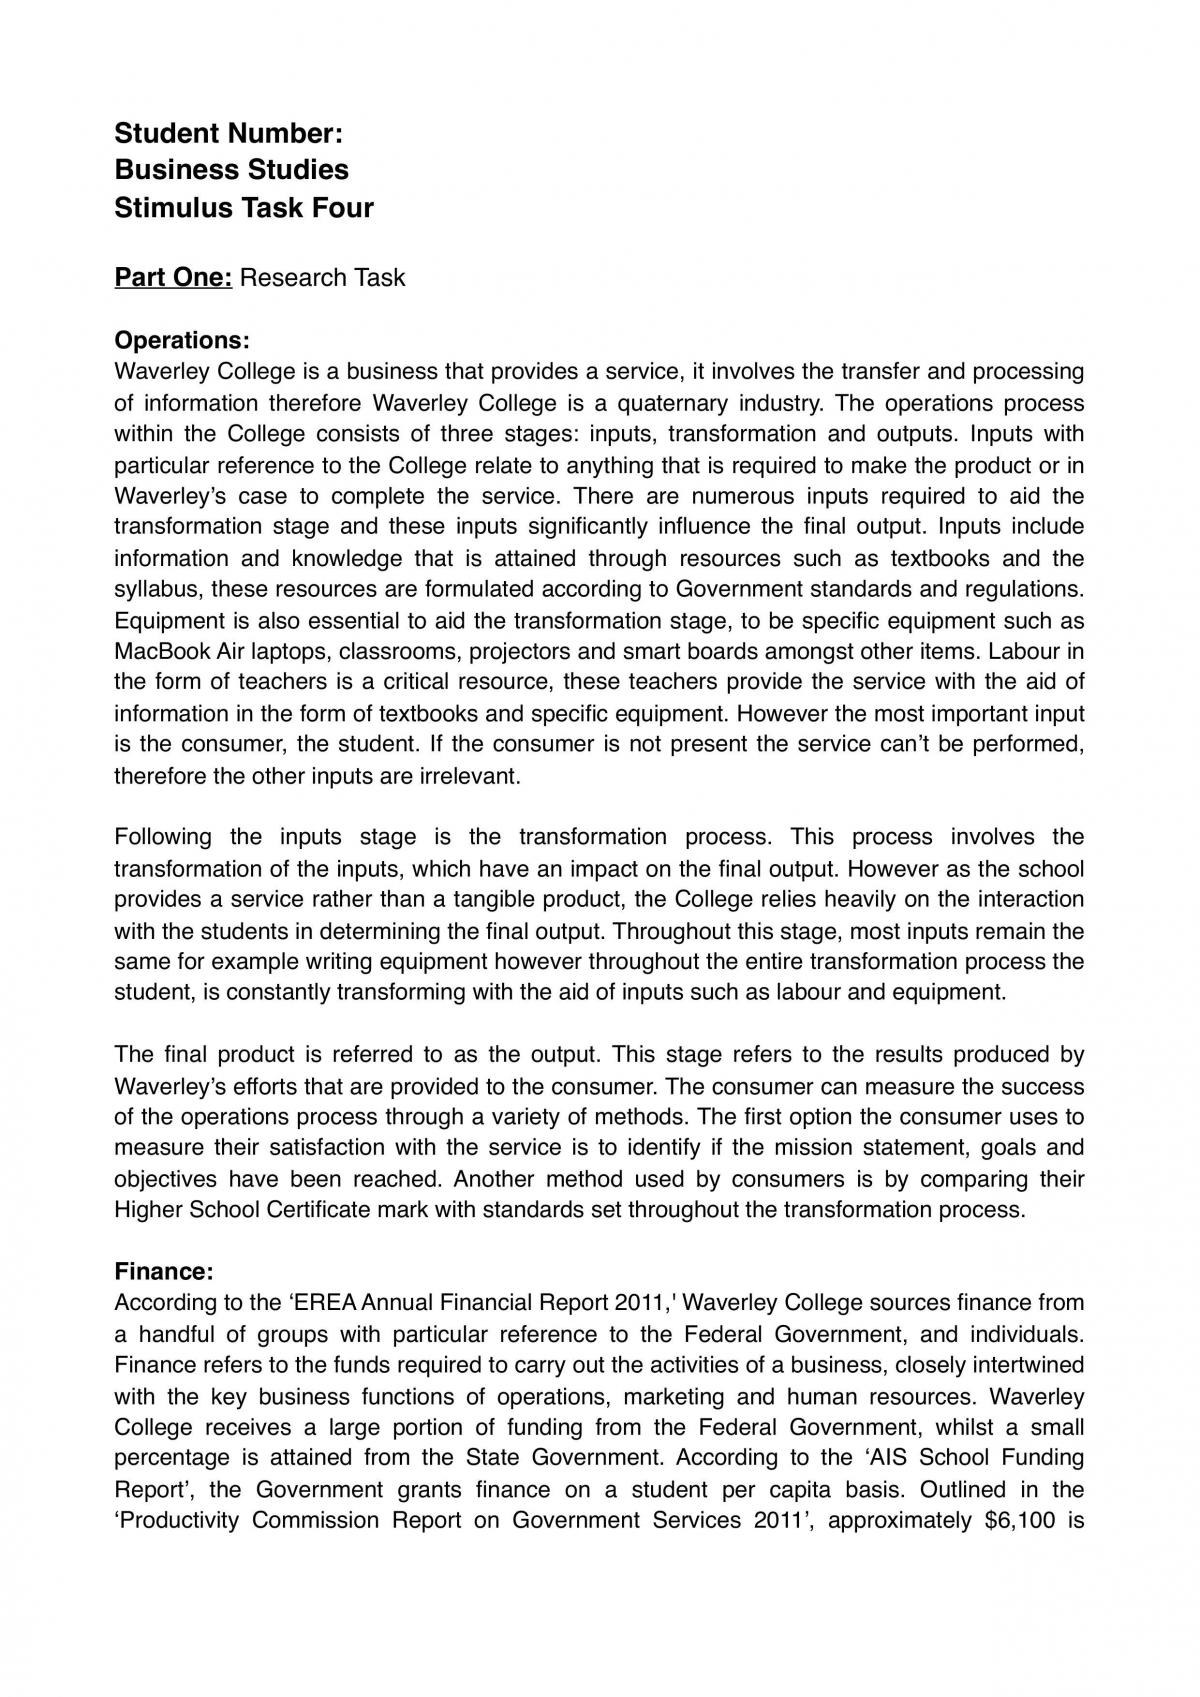 Research Task With Operations, Marketing, Finance & HR + Business Report - Page 1